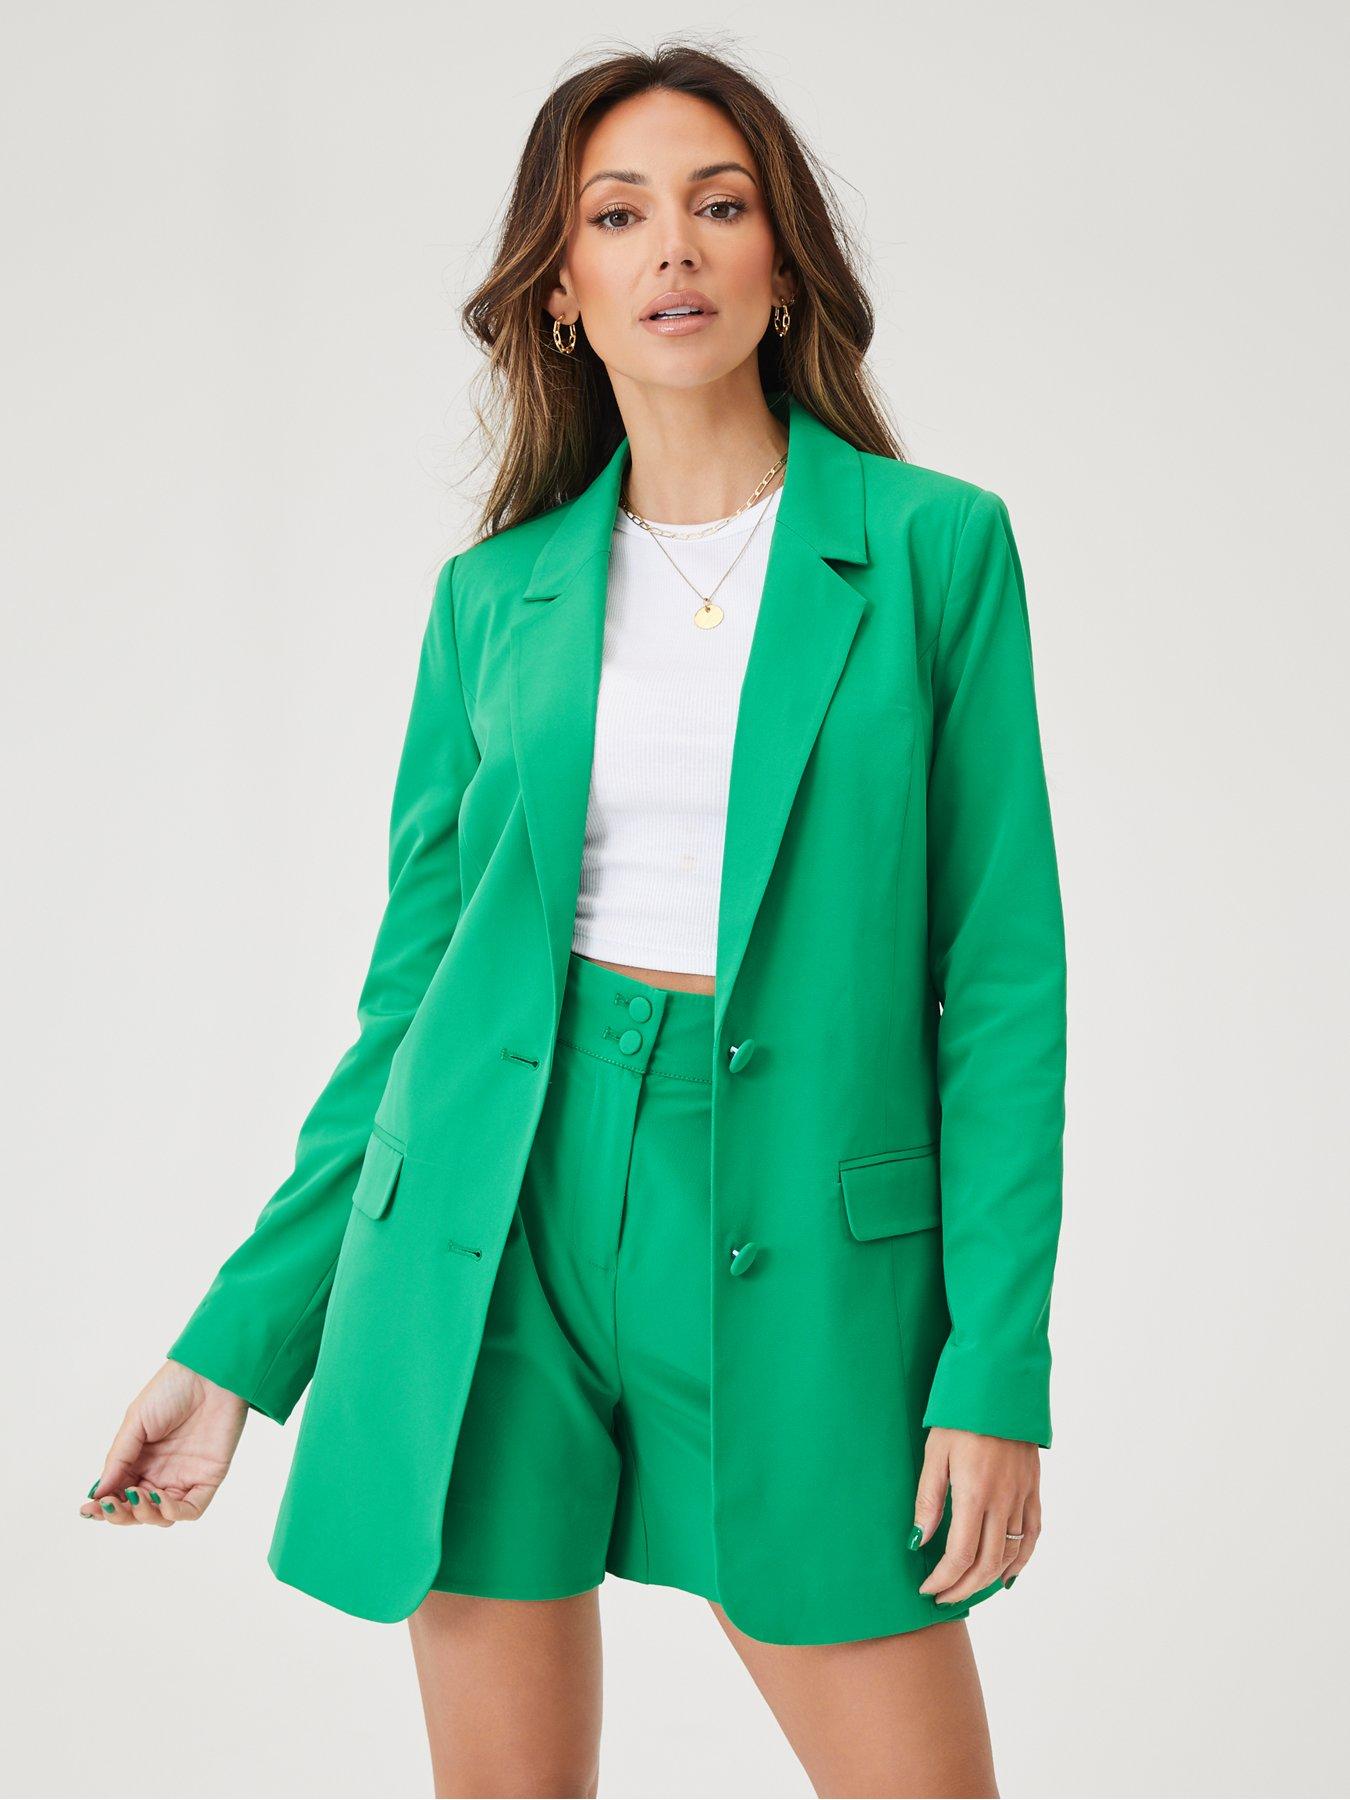 Michelle Keegan Single Breasted Blazer Co-ord - Green | littlewoods.com